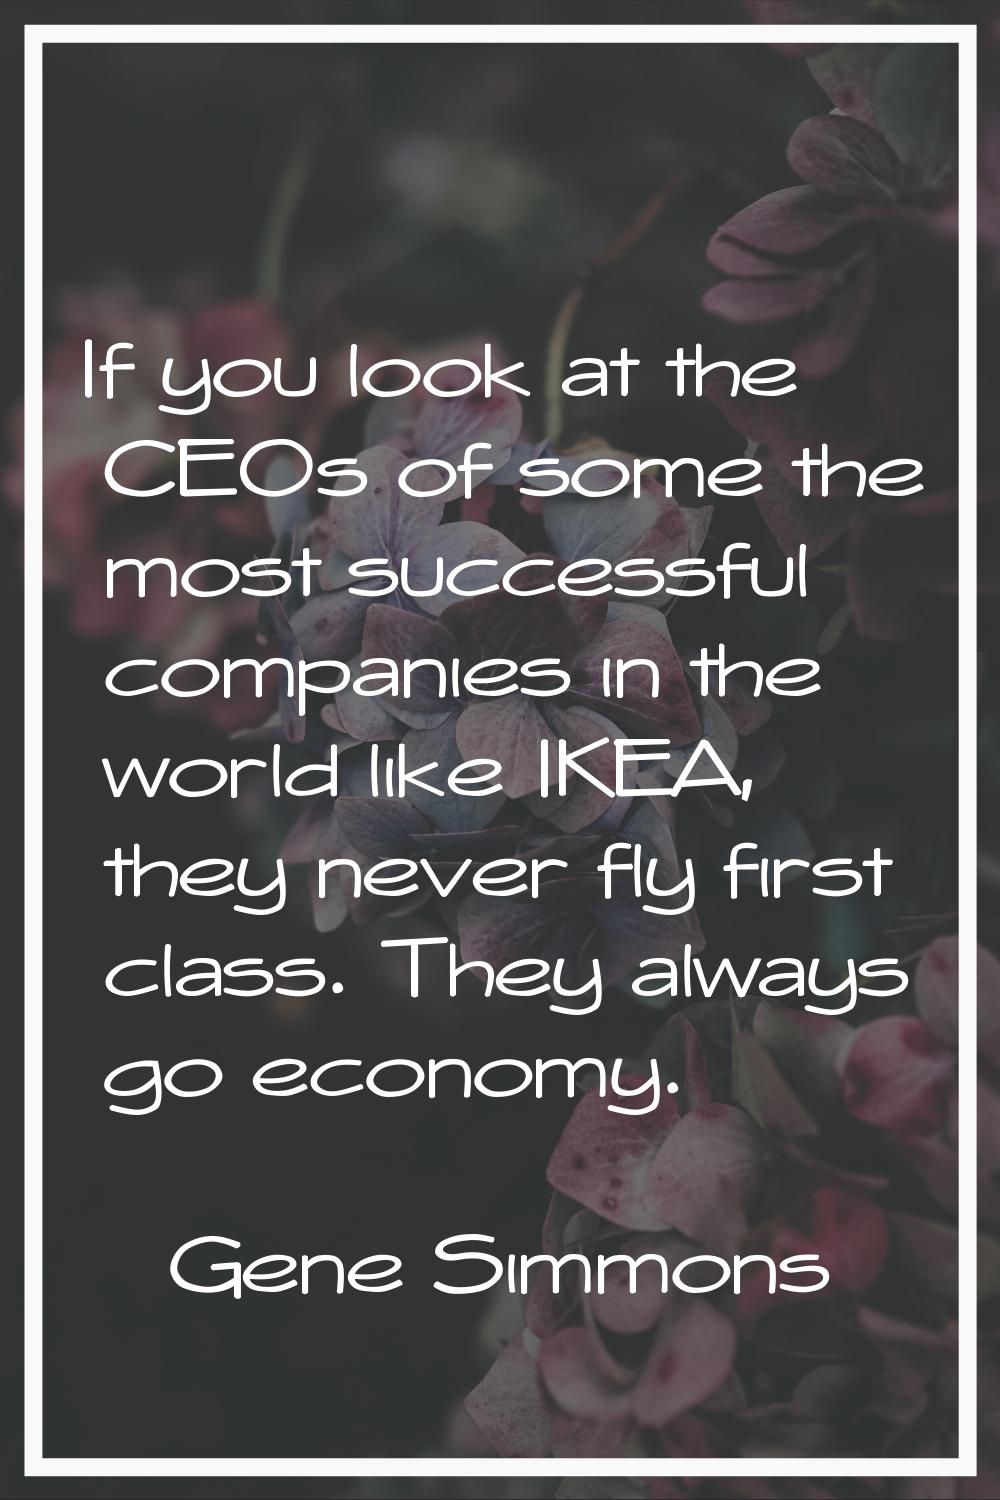 If you look at the CEOs of some the most successful companies in the world like IKEA, they never fl